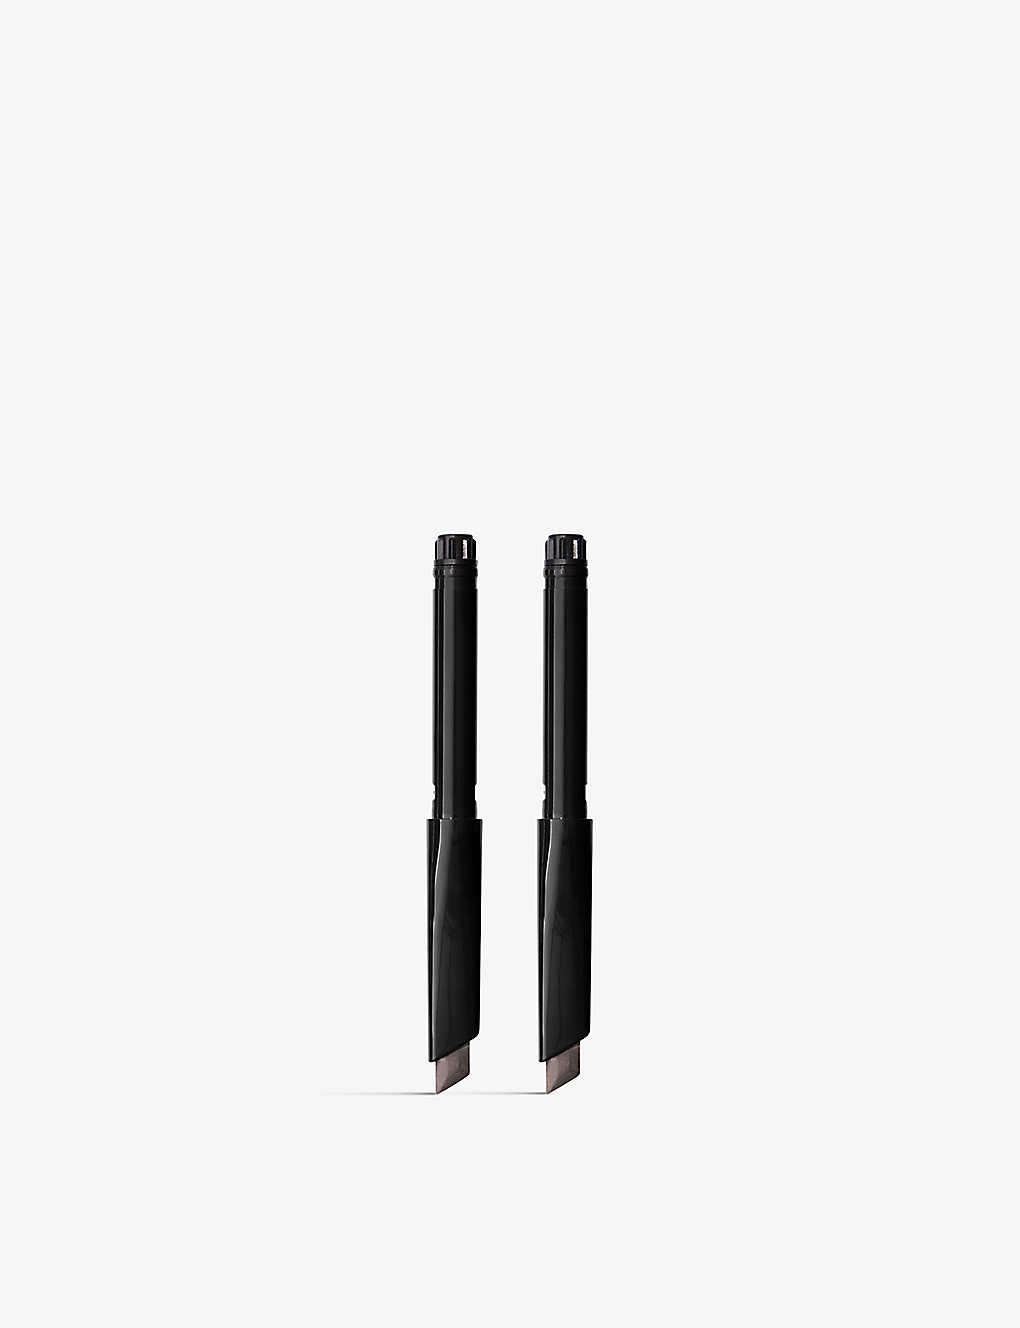 Bobbi Brown Neutral Brown Perfectly Defined Long-wear Brow Pencil Refill 0.33g